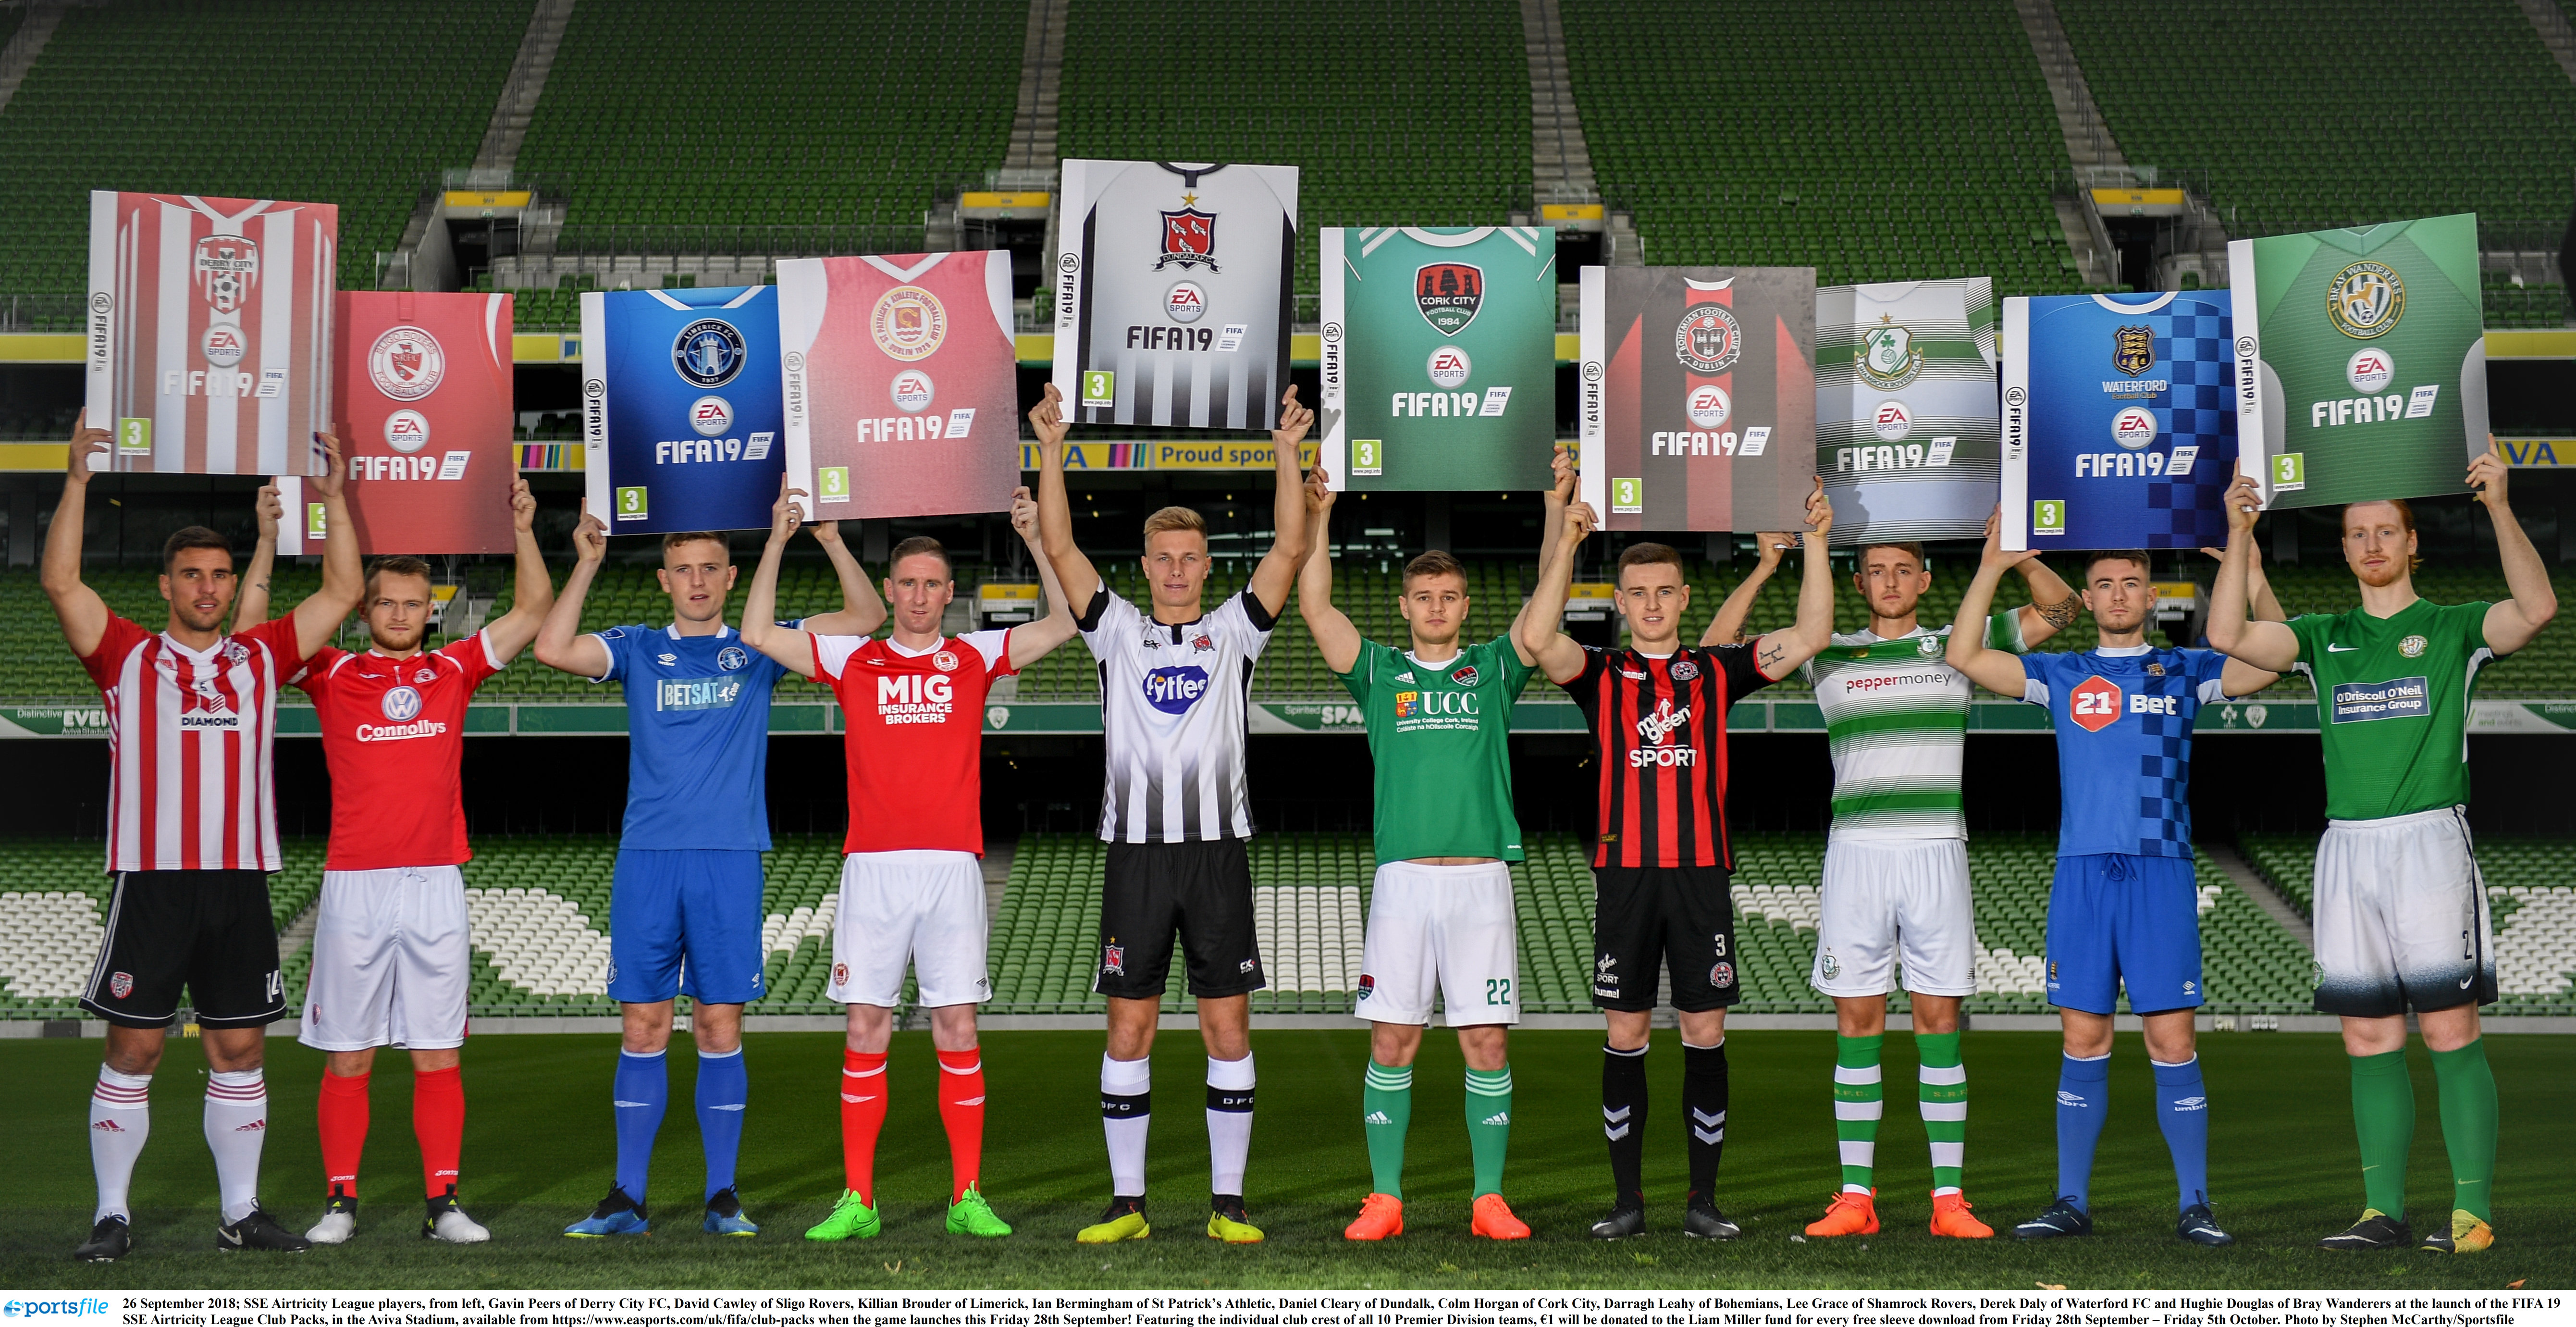 26 September 2018; SSE Airtricity League players, from left, Gavin Peers of Derry City FC, David Cawley of Sligo Rovers, Killian Brouder of Limerick, Ian Bermingham of St Patricks Athletic, Daniel Cleary of Dundalk, Colm Horgan of Cork City, Darragh Leahy of Bohemians, Lee Grace of Shamrock Rovers, Derek Daly of Waterford FC and Hughie Douglas of Bray Wanderers at the launch of the FIFA 19 SSE Airtricity League Club Packs, in the Aviva Stadium, available from https://www.easports.com/uk/fifa/club-packs when the game launches this Friday 28th September! Featuring the individual club crest of all 10 Premier Division teams, 1 will be donated to the Liam Miller fund for every free sleeve download from Friday 28th September  Friday 5th October. Photo by Stephen McCarthy/Sportsfile